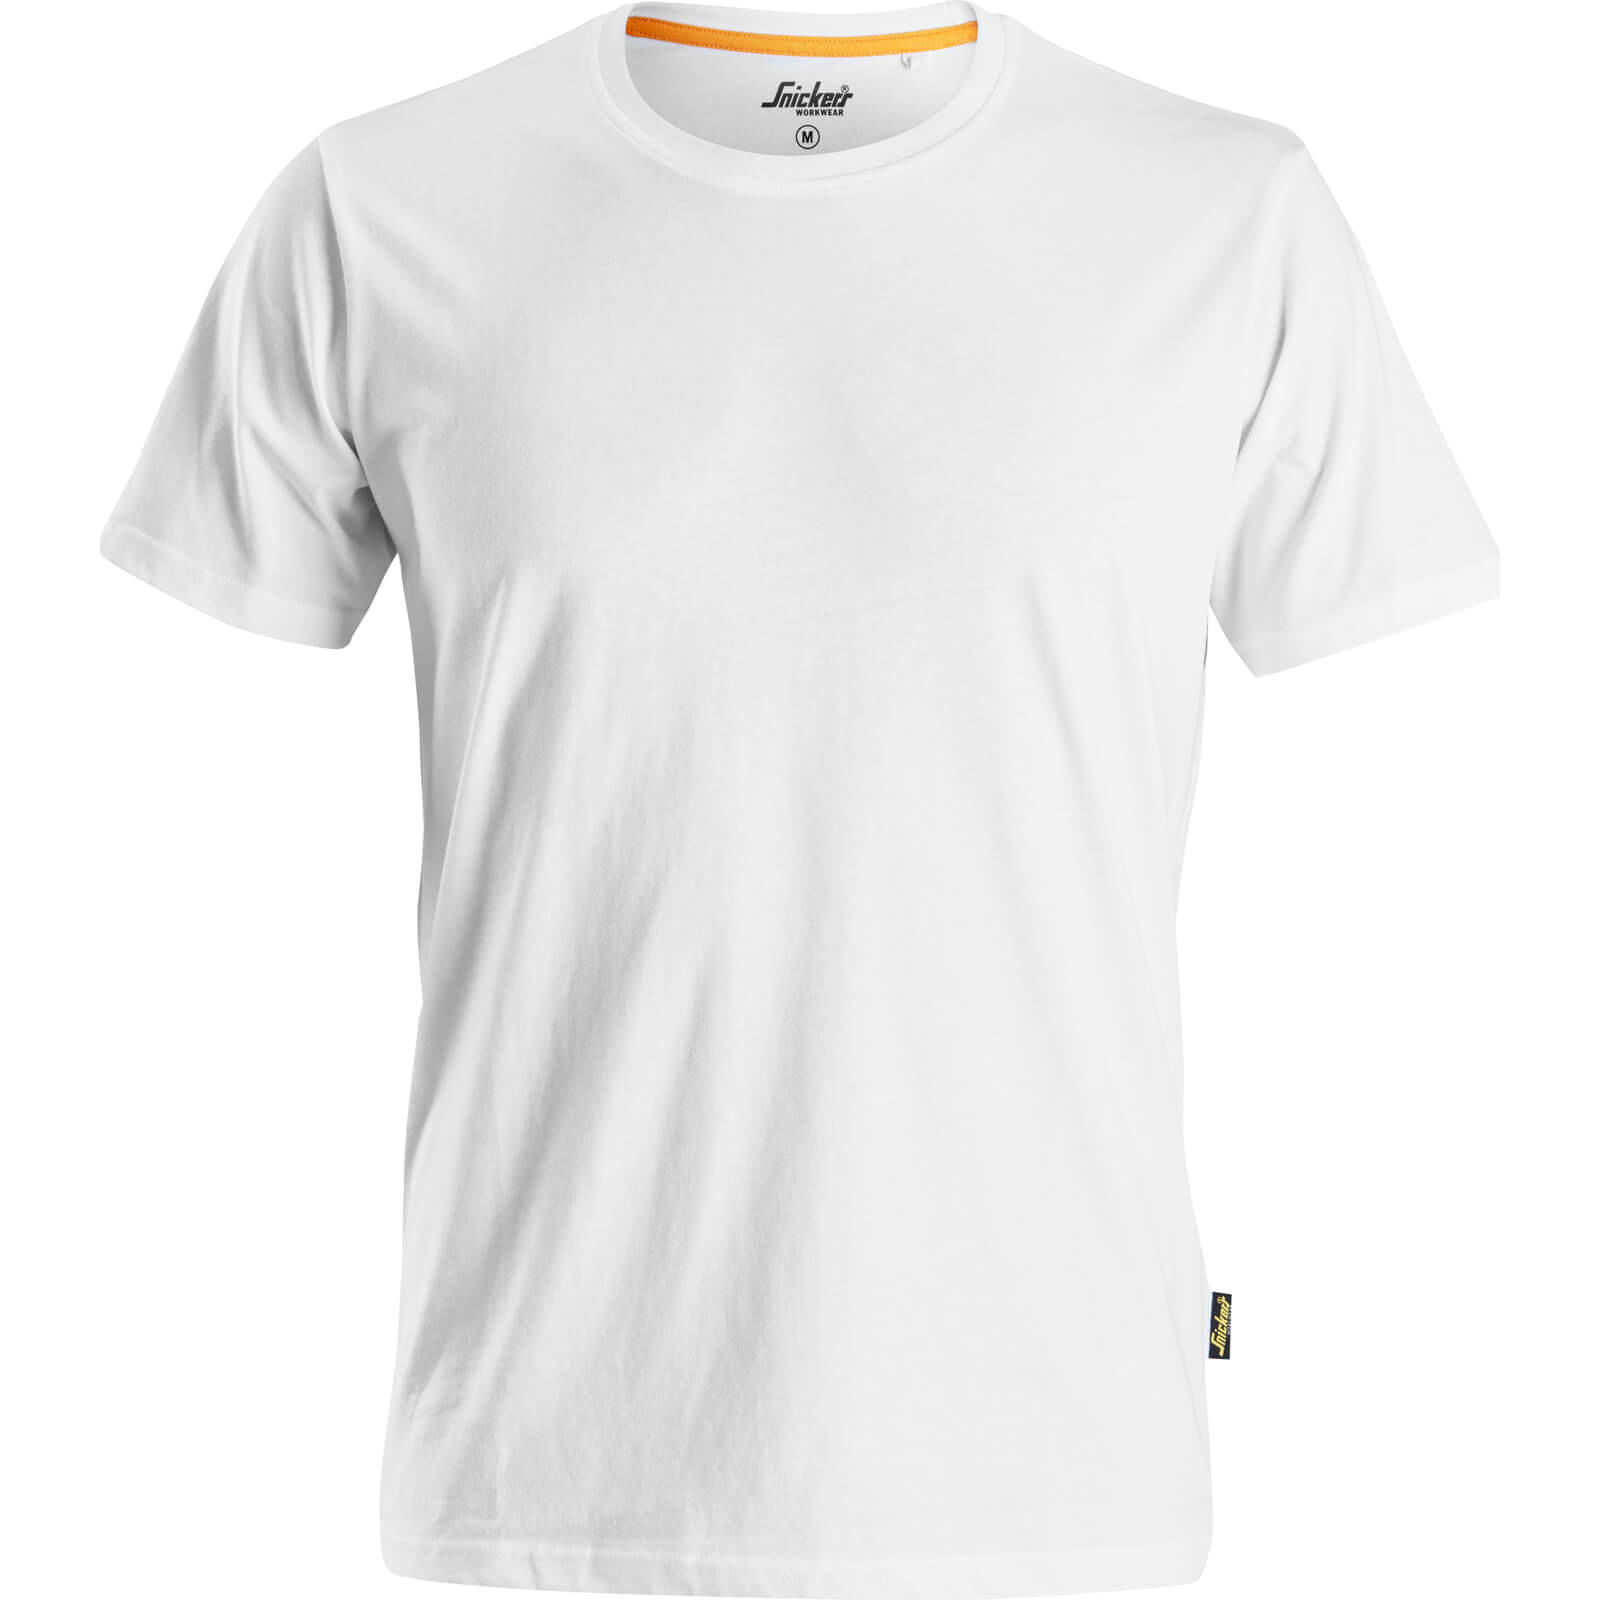 Image of Snickers Allround Work Organic Cotton T Shirt White L